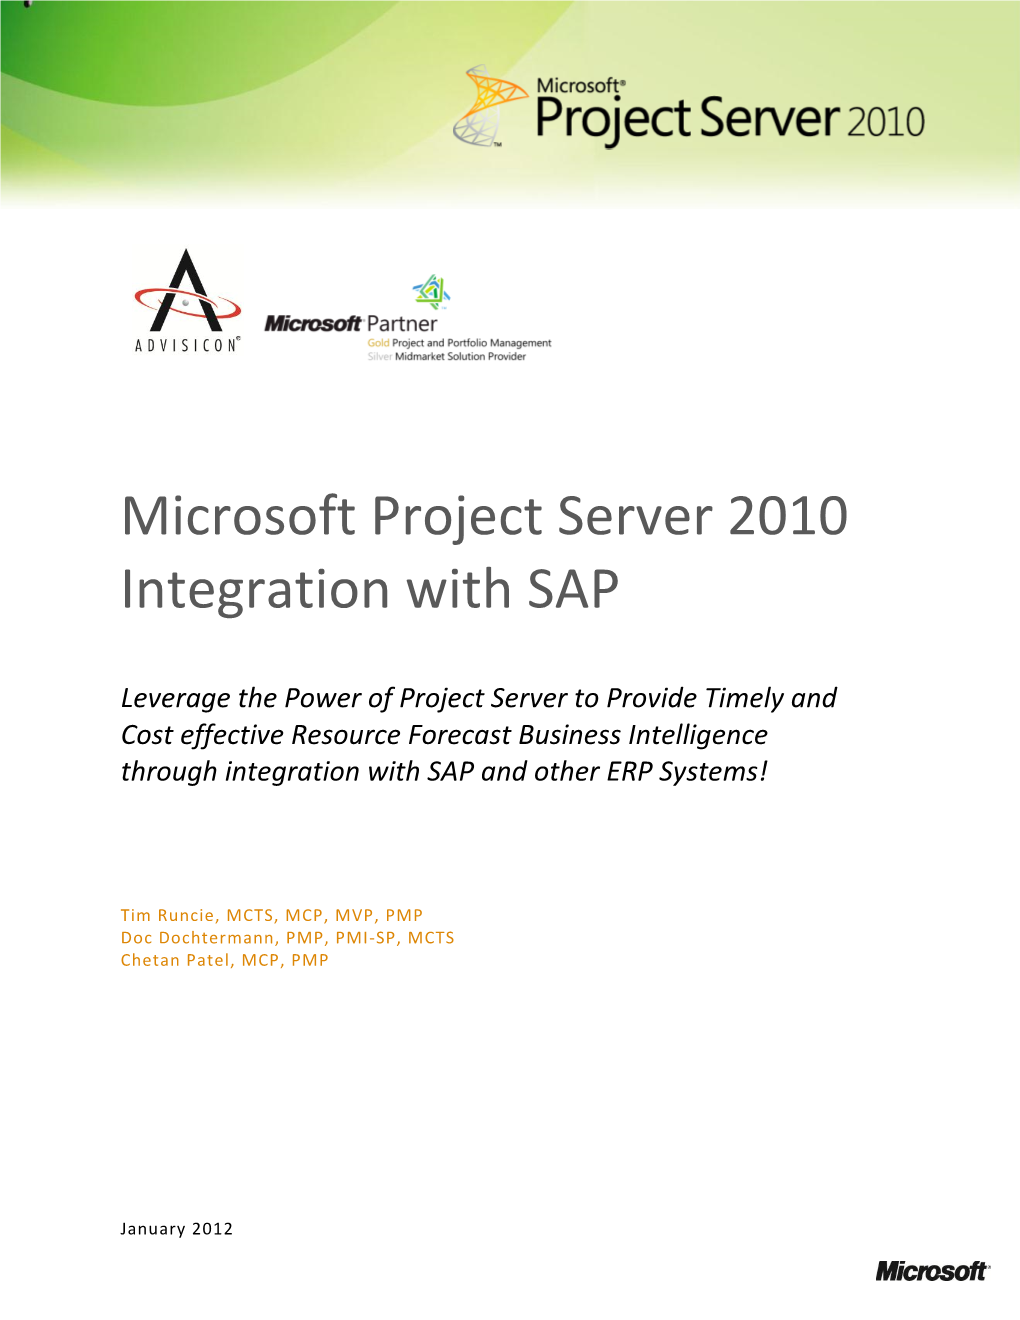 Microsoft Project Server 2010 Integration with SAP